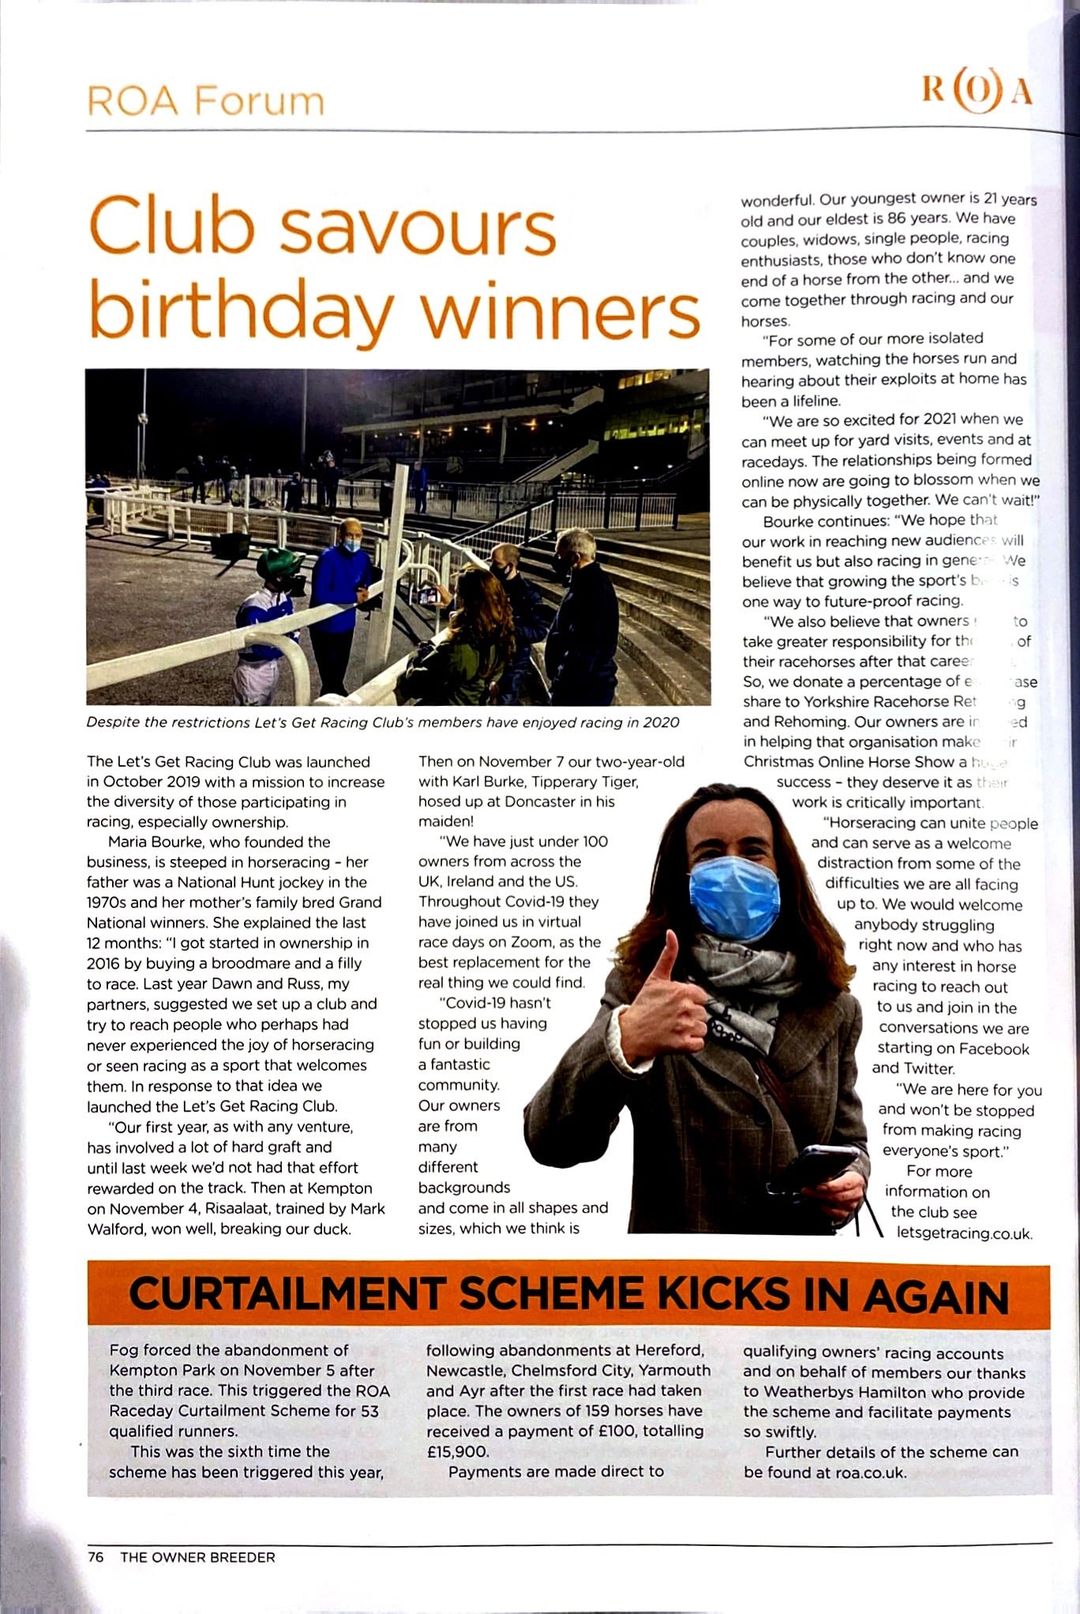 The Owner Breeder magazine joining Let’s Get Racing’s birthday celebrations.